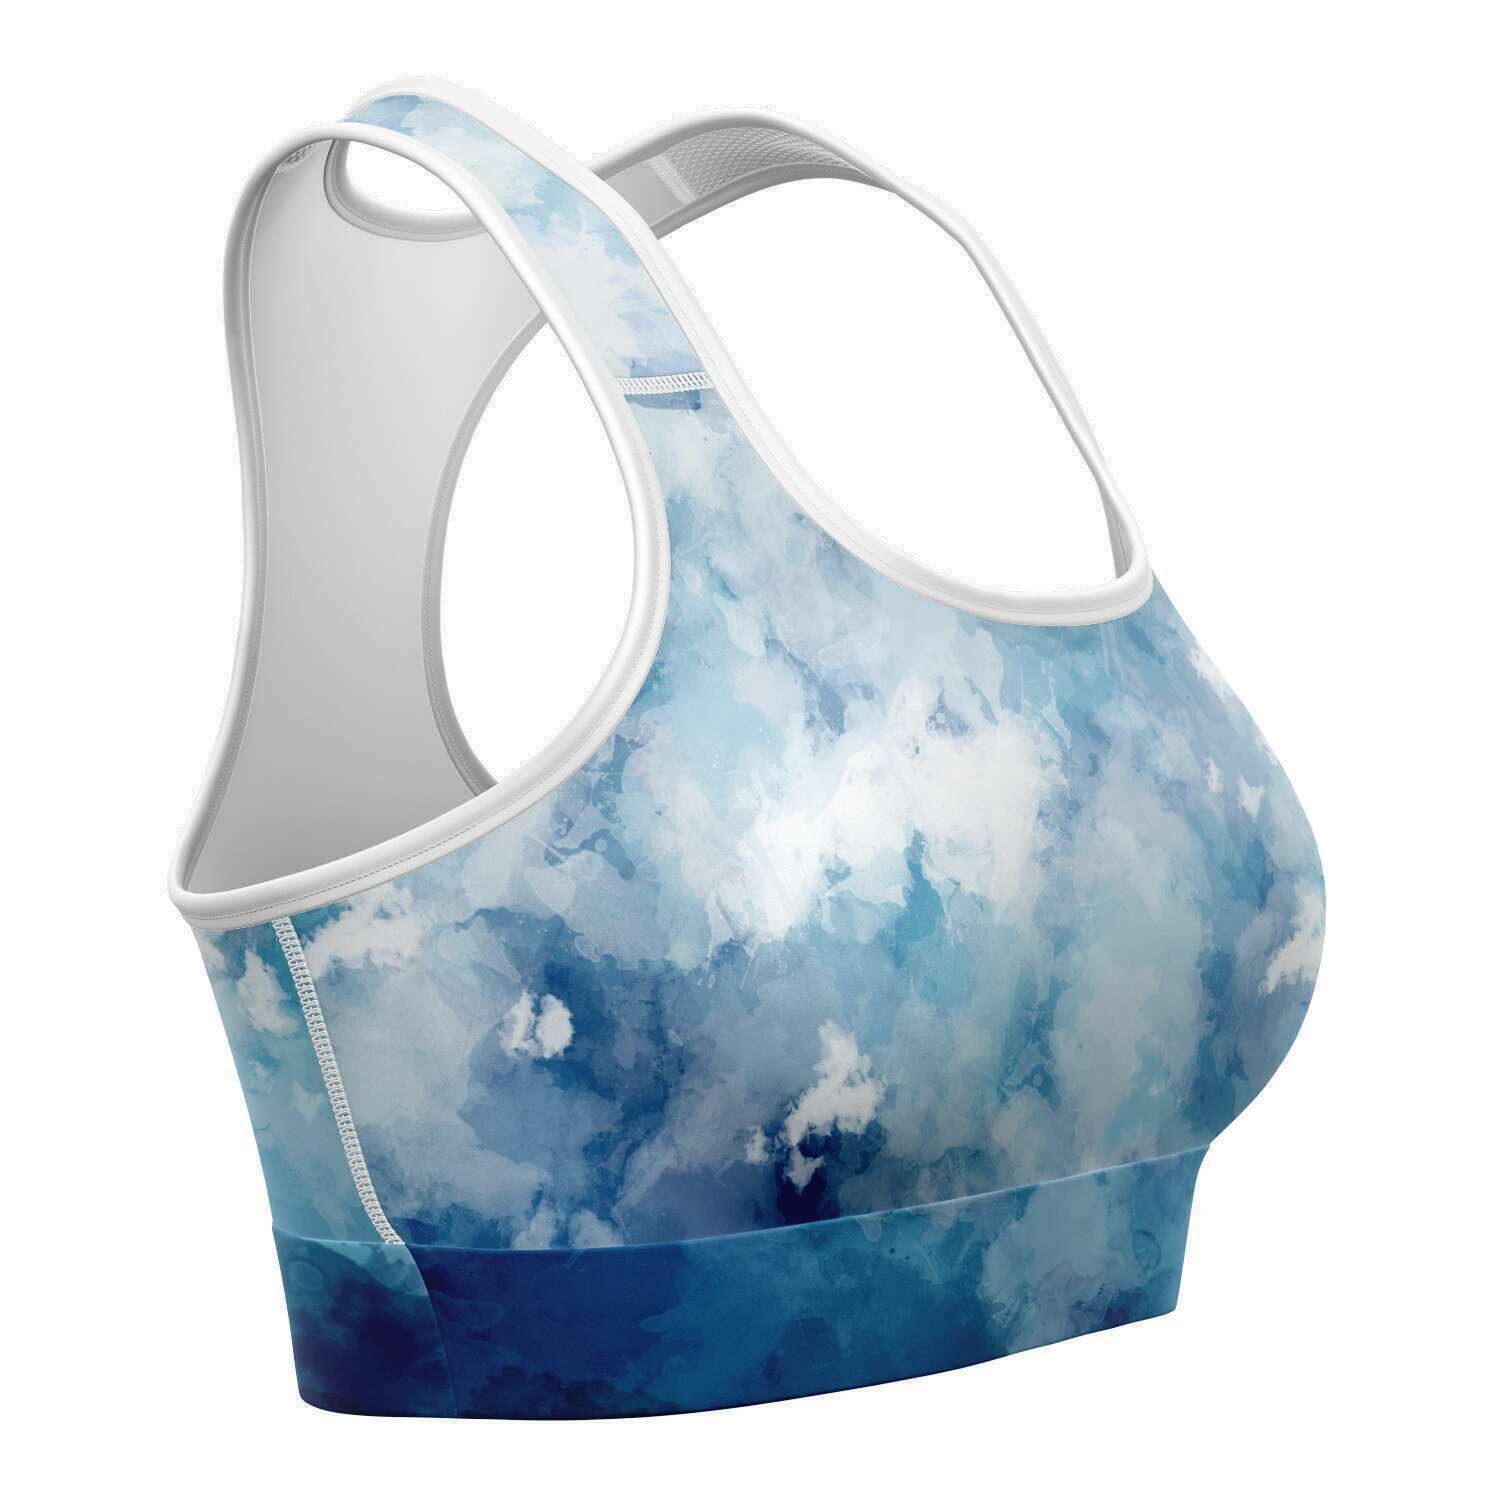 Women's Head In The Clouds Blue White Tie-Dye Athletic Sports Bra Right